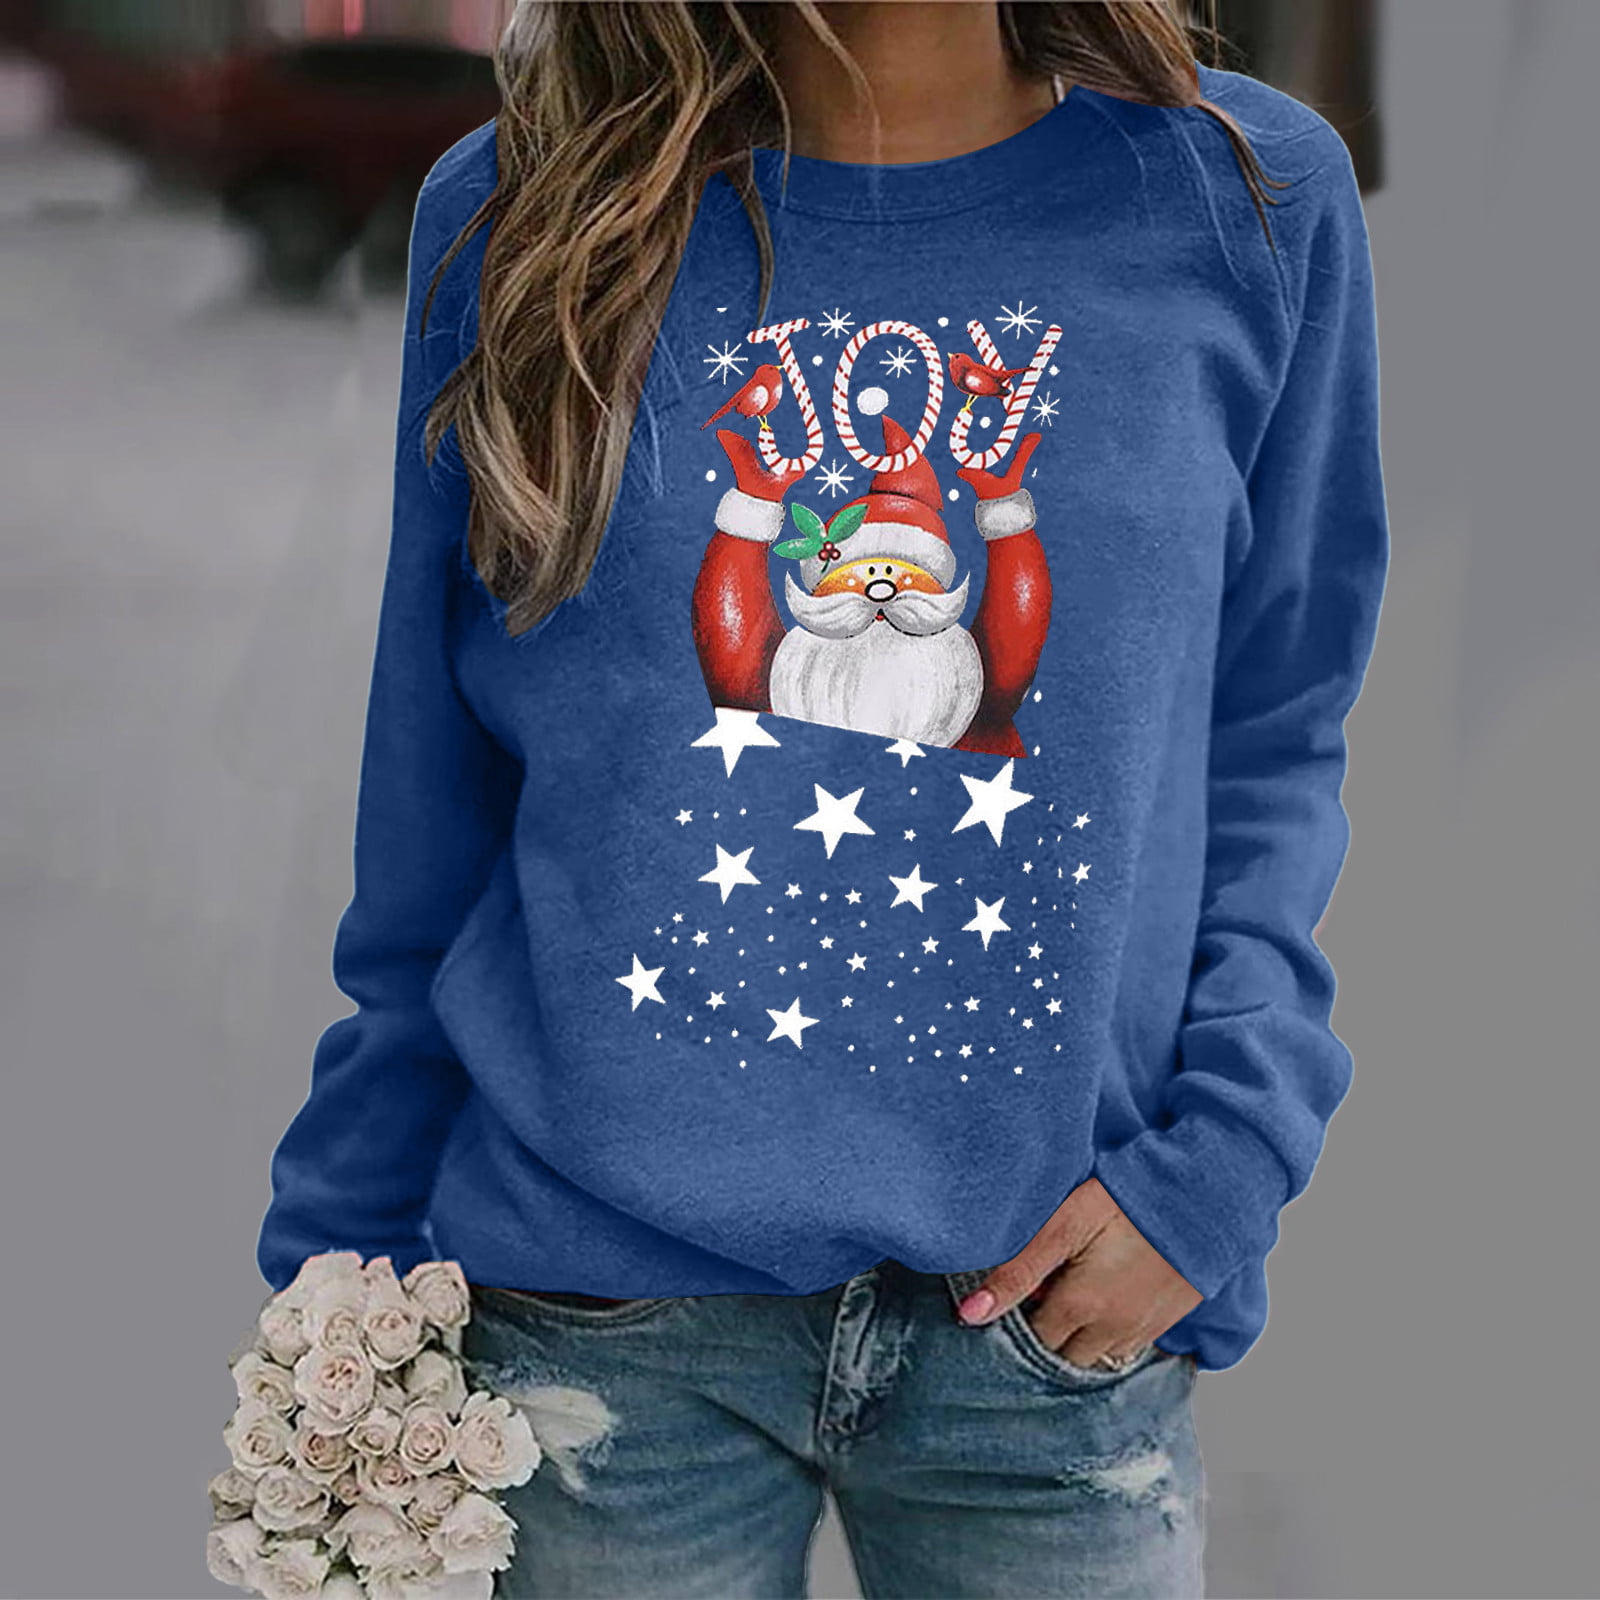 ONHUON Sweatshirts for Women,Womens Plus Size Christmas Funny Printed Loose Crewneck Blouse Tunic Tops Pullover 